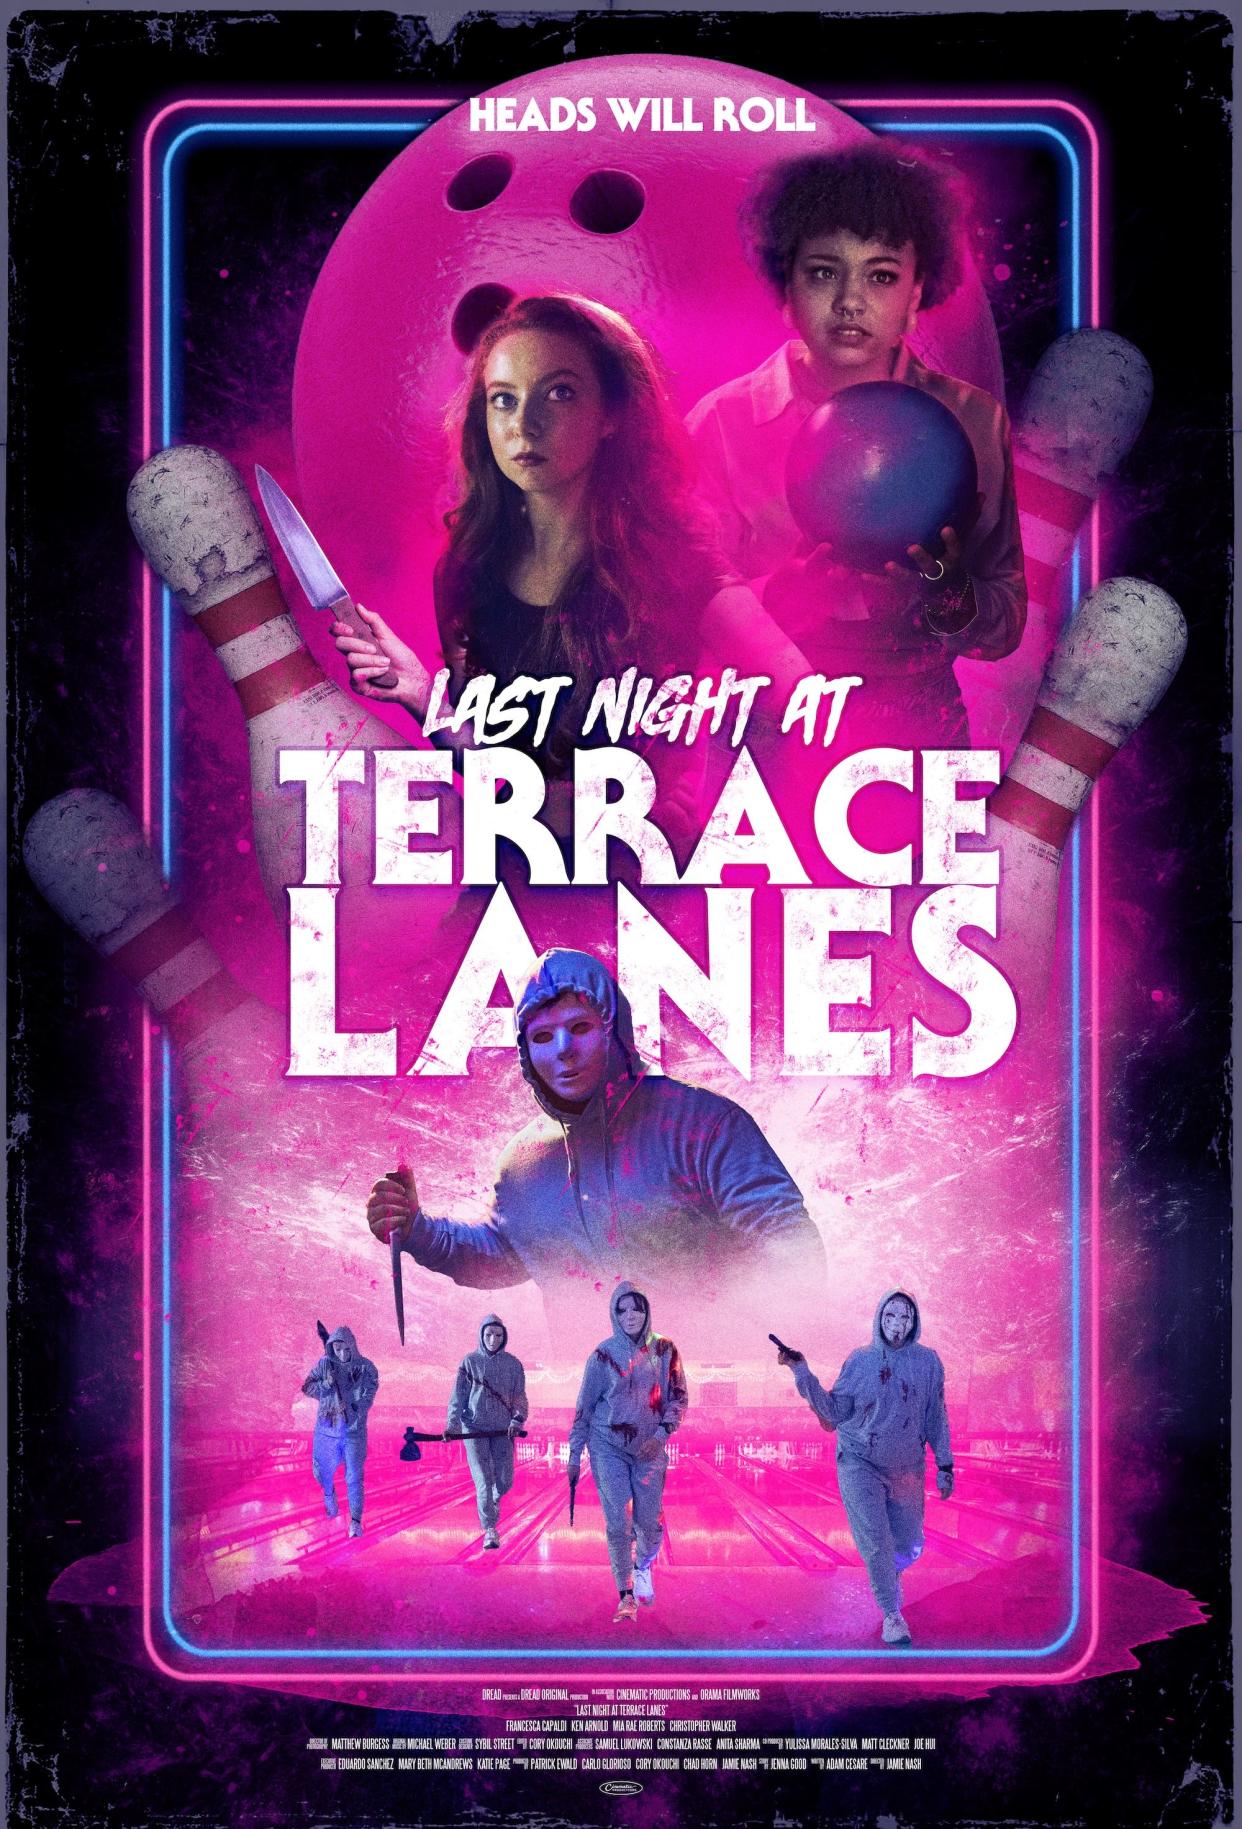 The horror film "Last Night at Terrace Lanes," which features an original score by Silver Lake musician Michael Weber and a soundtrack by all Northeast Ohio bands, premiered Jan. 16 on Apple TV.